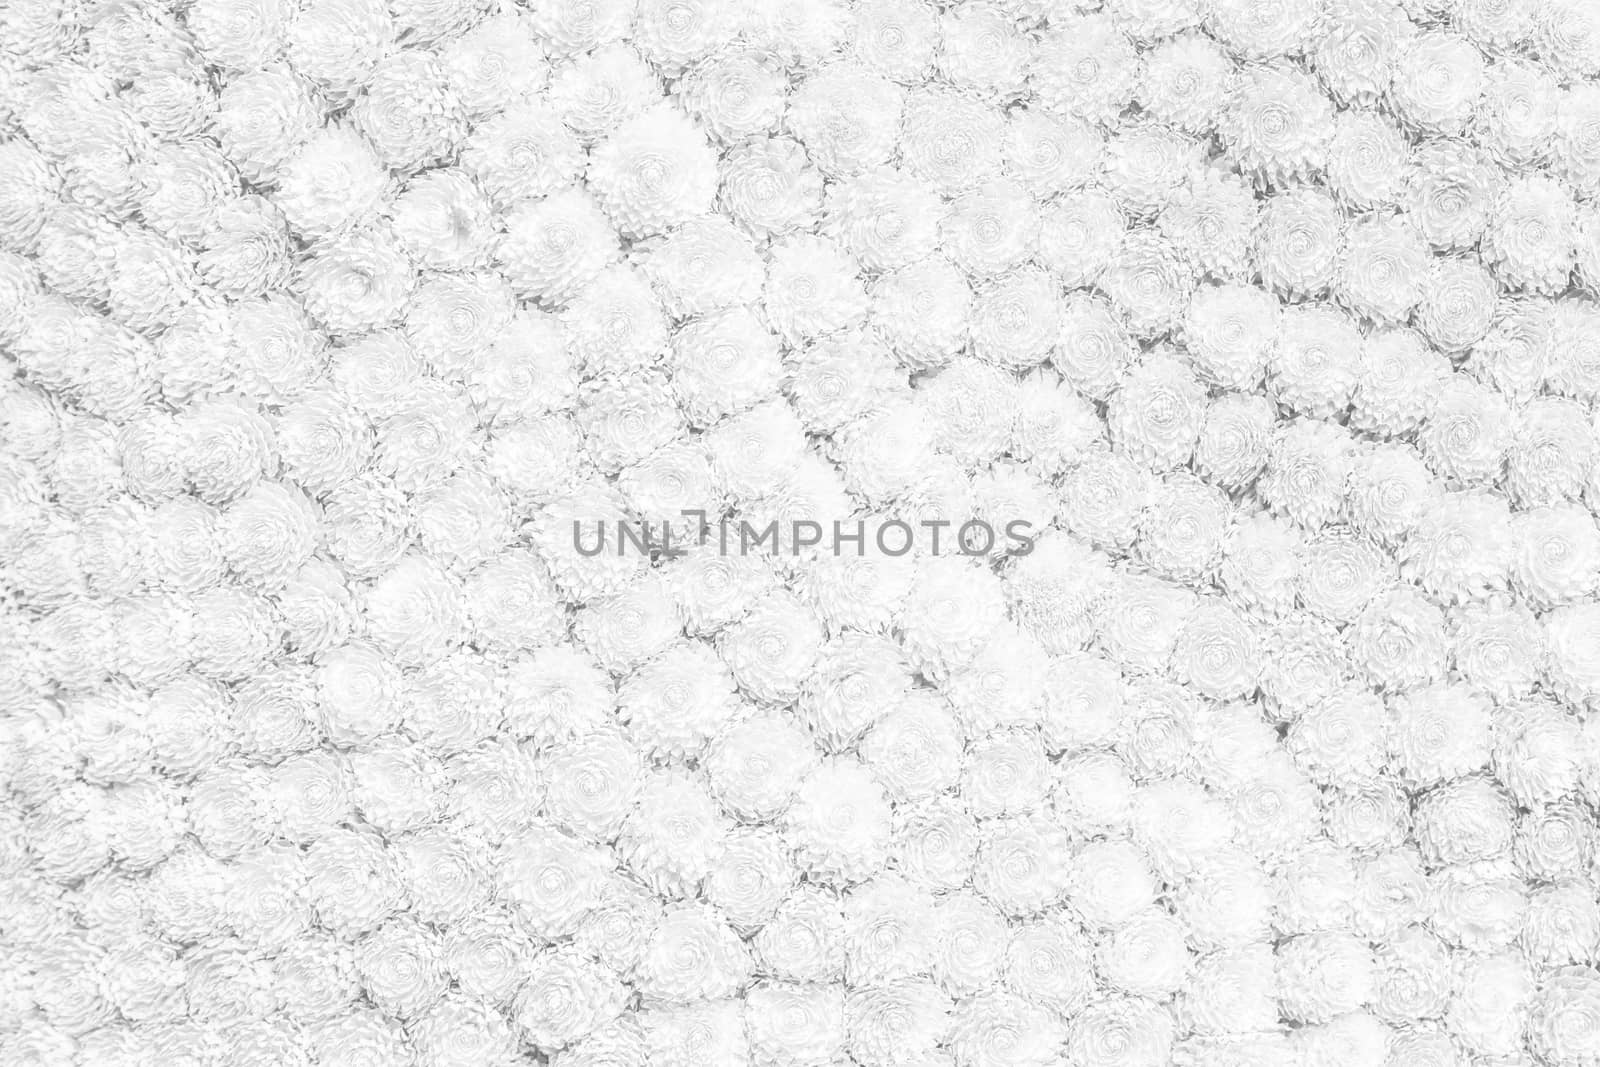 White background texture of flowers by Suriyaphoto